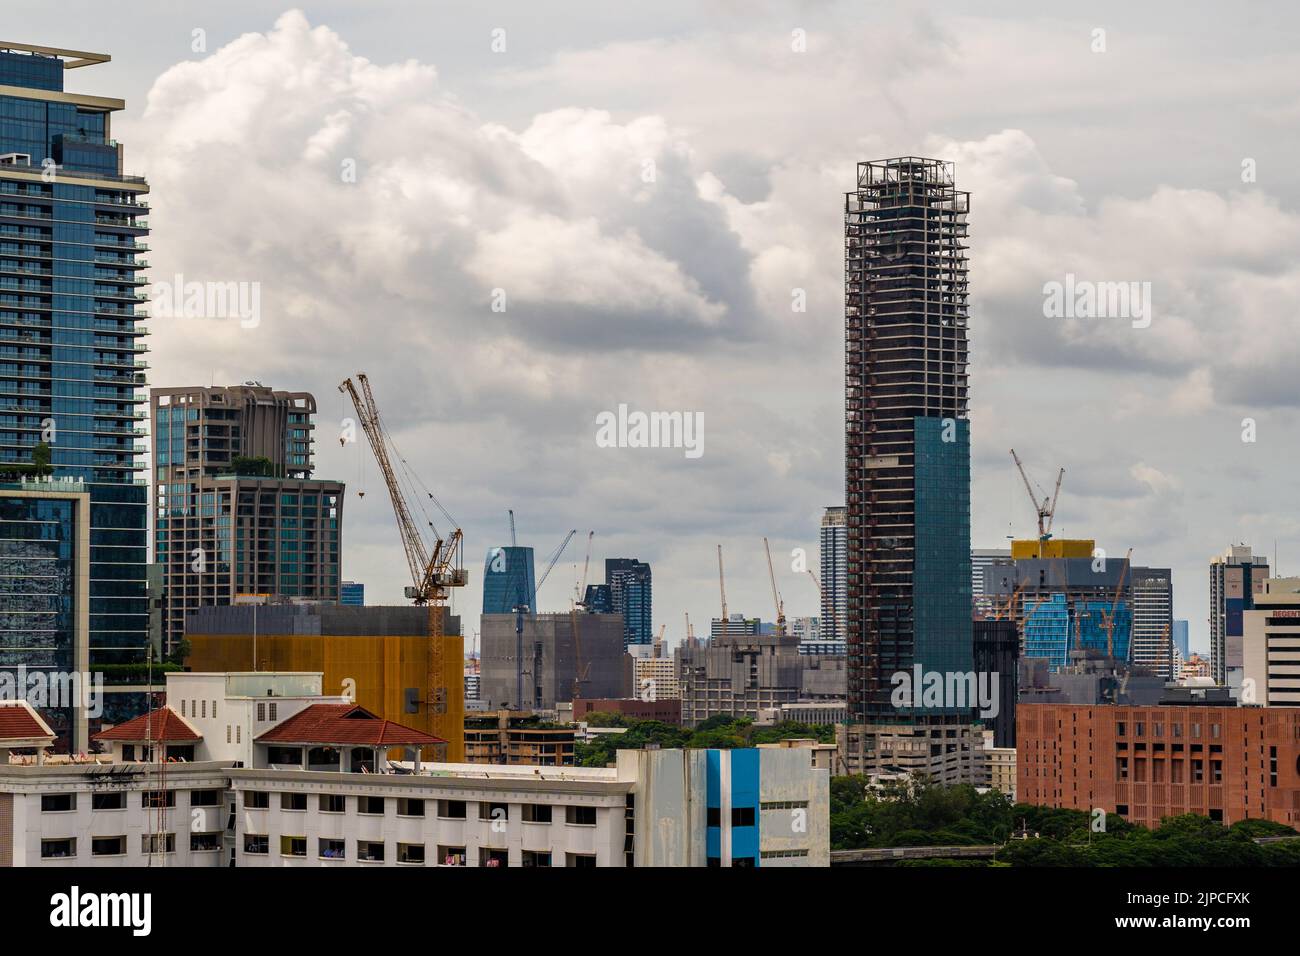 Bangkok, Thailand - 12  August 2022 - Large working construction cranes working on building high-rise buildings in Bangkok, Thailand Stock Photo